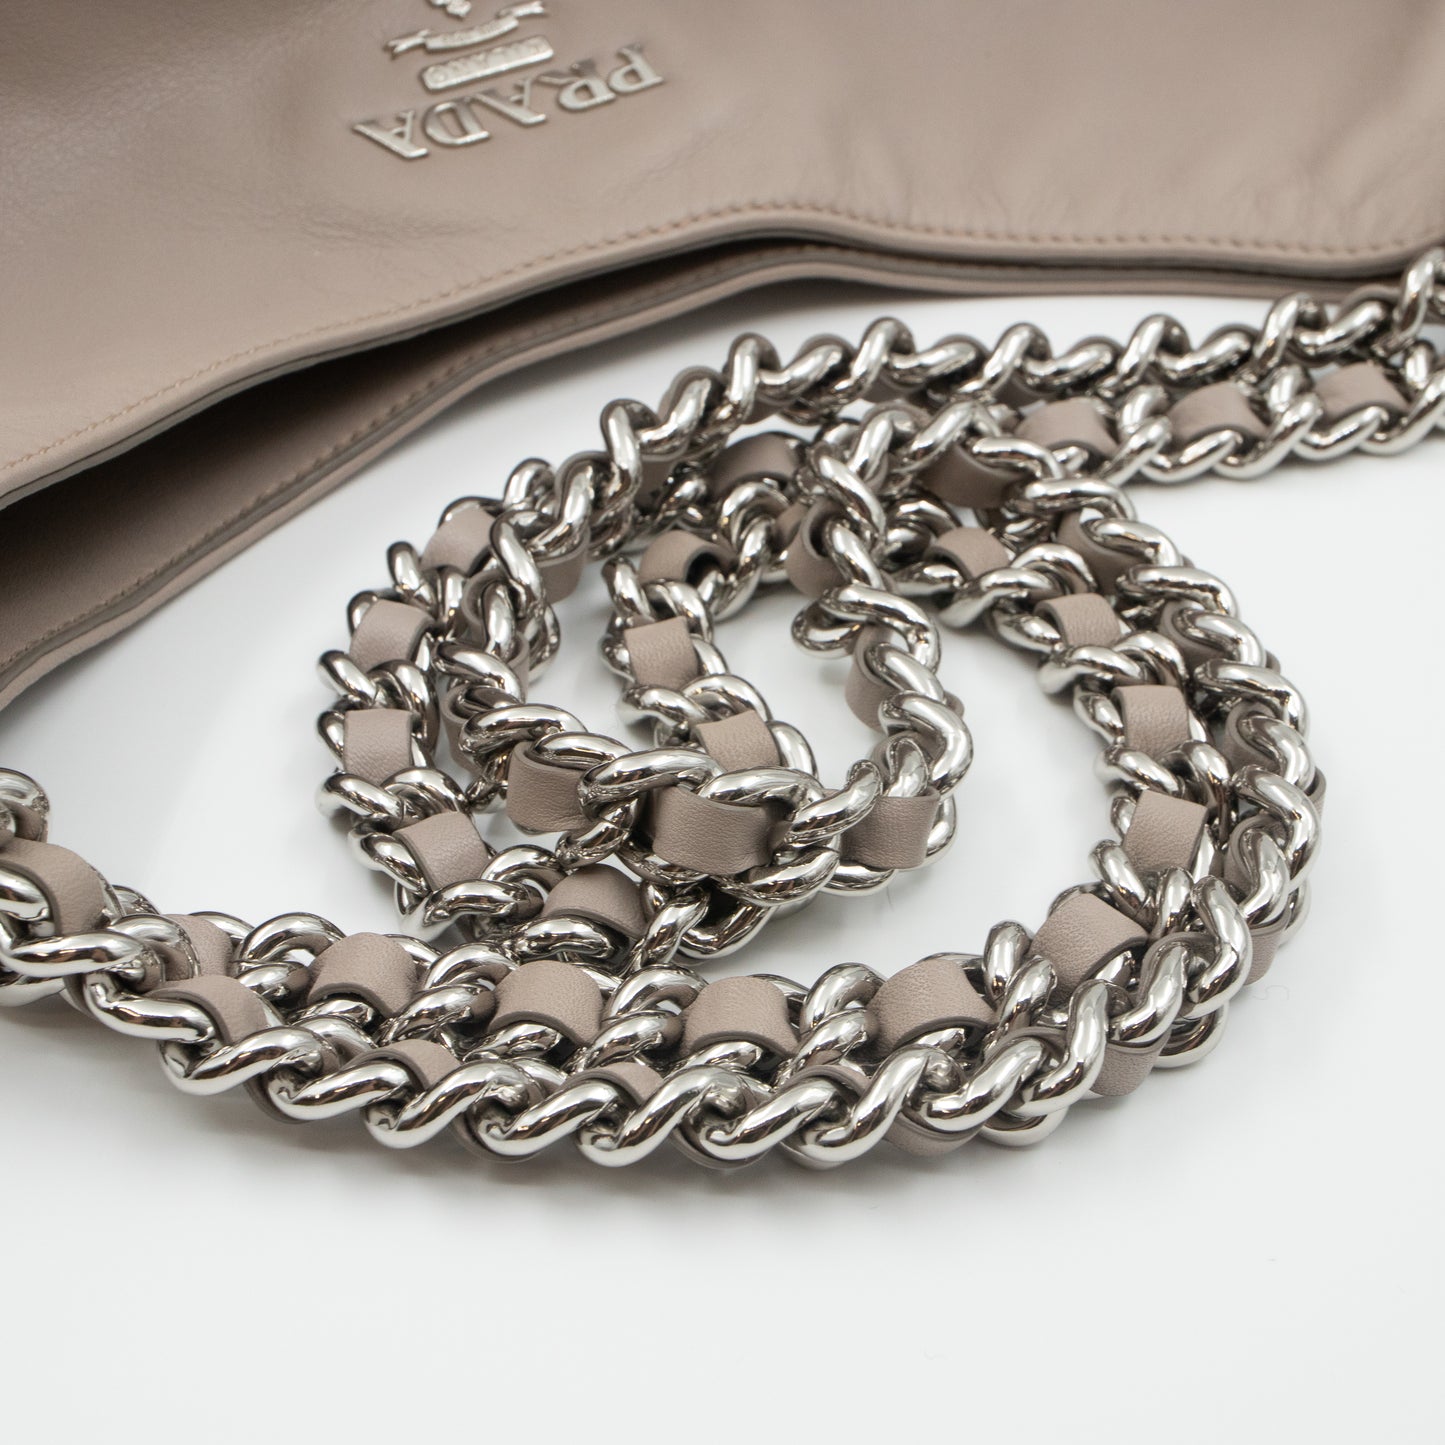 Soft Chain Tote Gray Leather